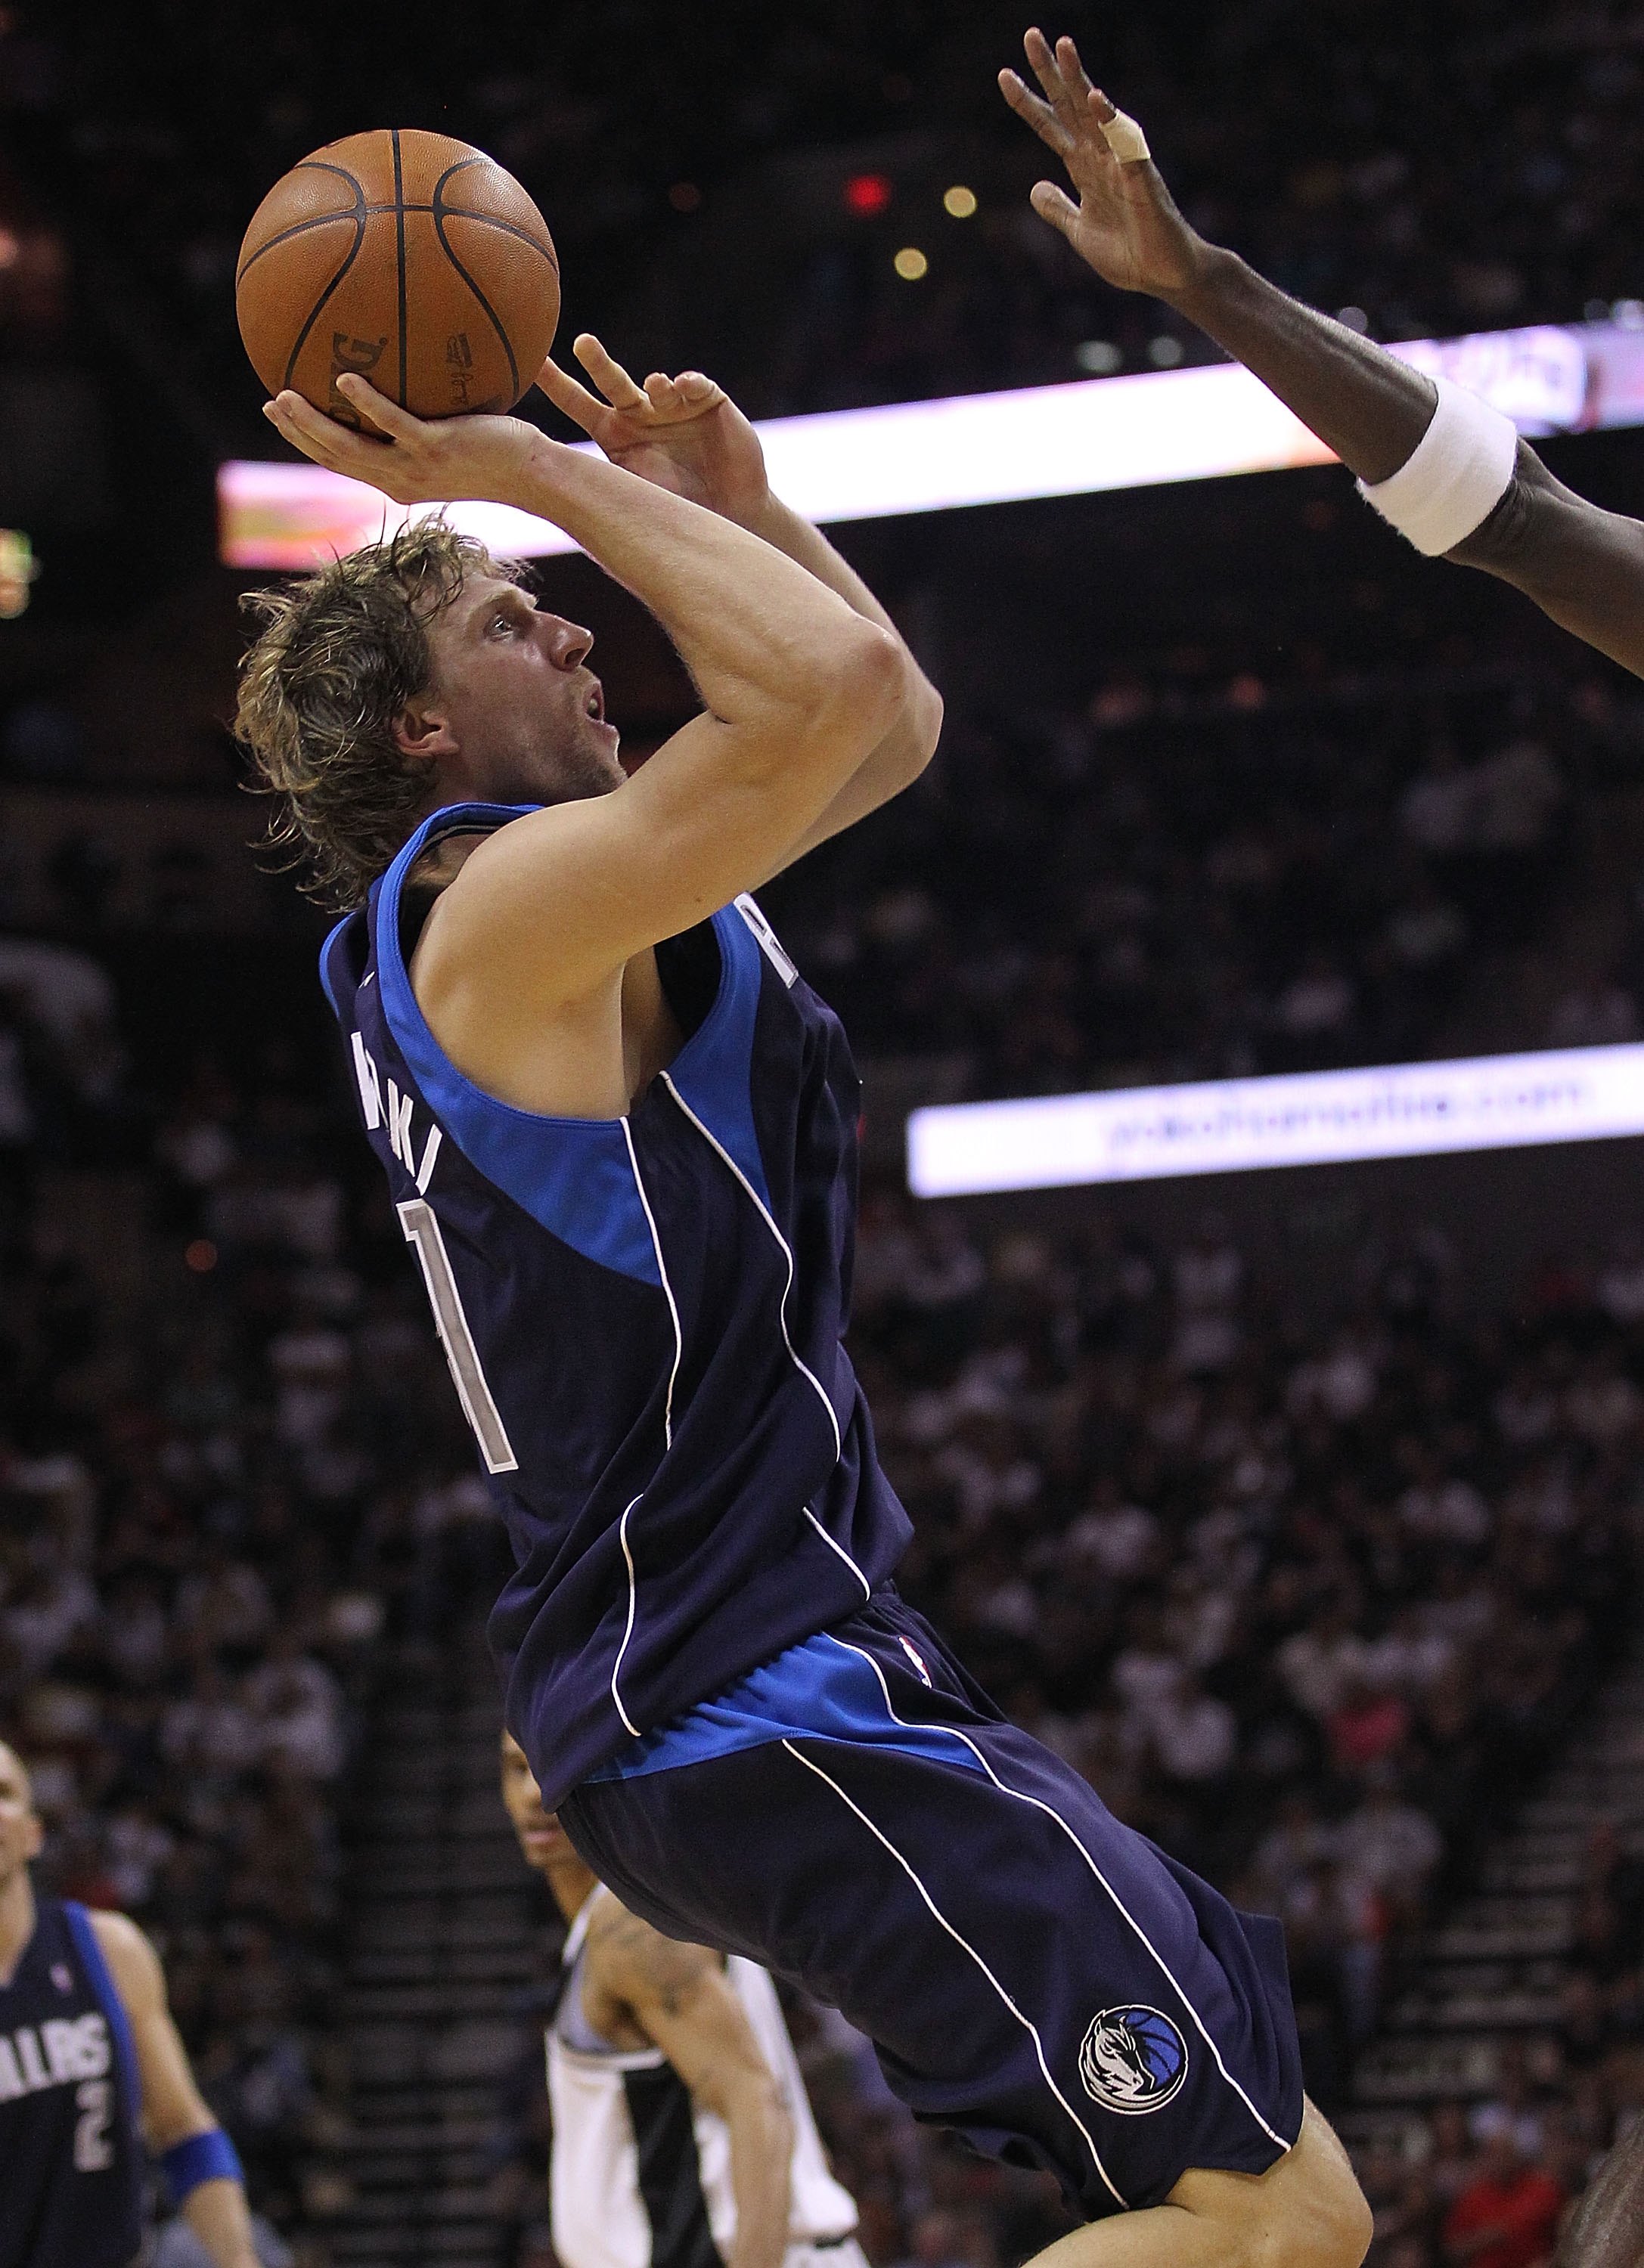 SAN ANTONIO - APRIL 29:  Dirk Nowitzki #41 of the Dallas Mavericks in Game Six of the Western Conference Quarterfinals during the 2010 NBA Playoffs at AT&T Center on April 29, 2010 in San Antonio, Texas. NOTE TO USER: User expressly acknowledges and agree